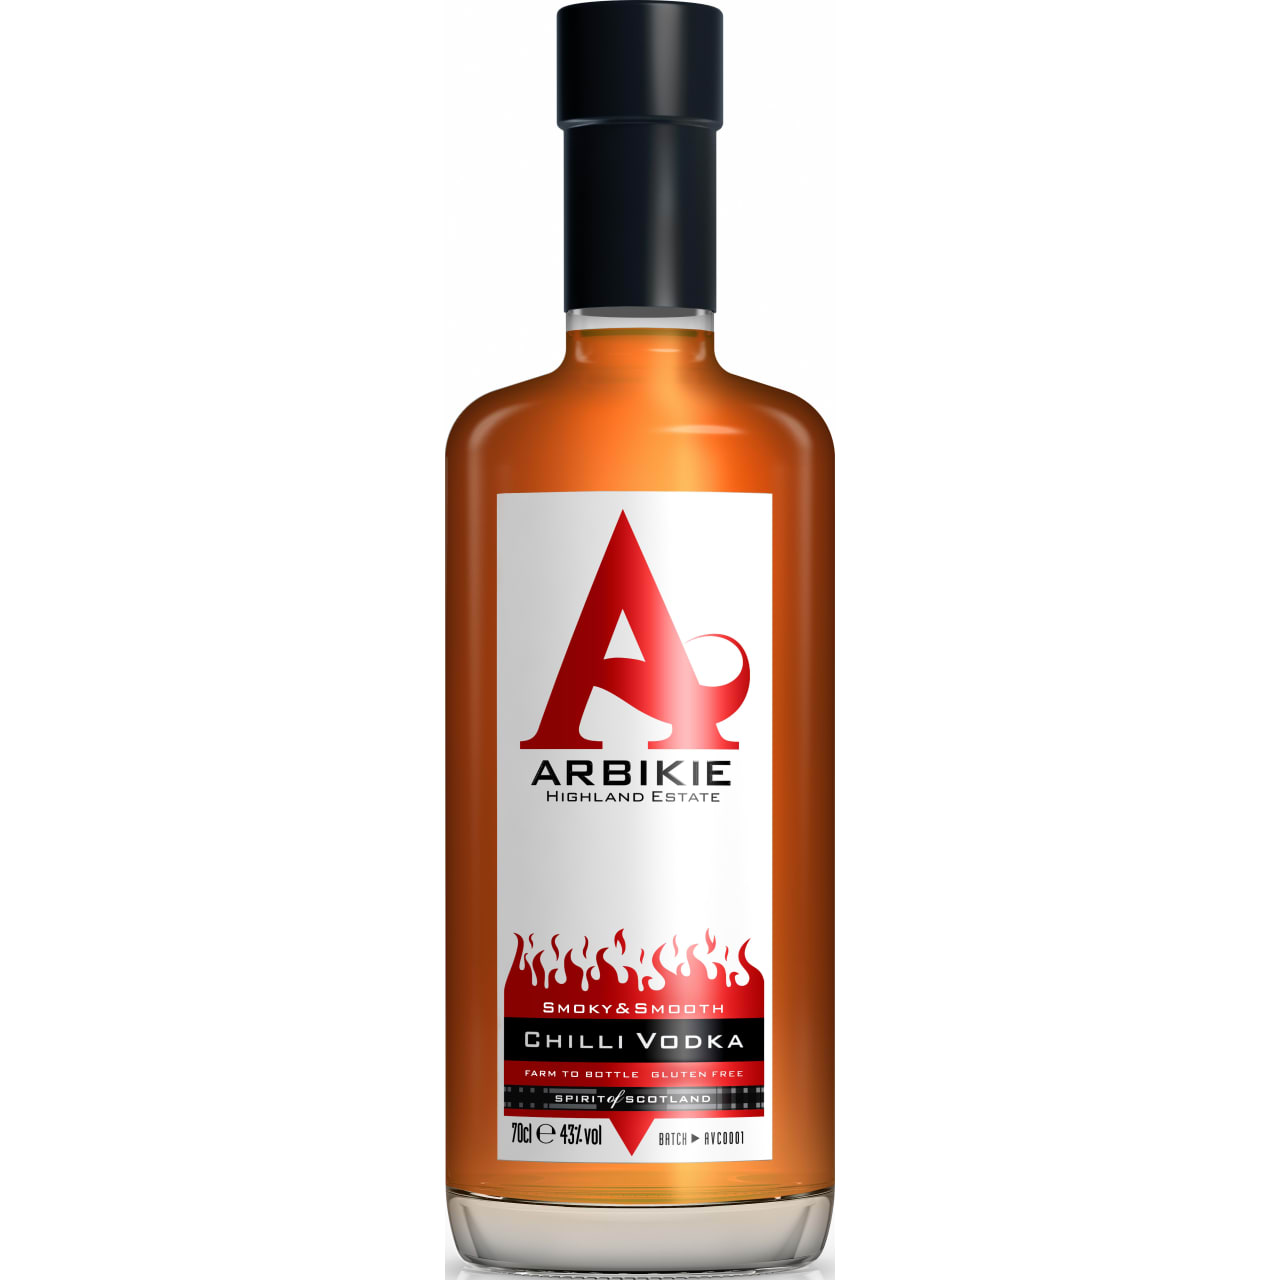 Arbikie Chilli Vodka captures the smokiness of the chipotle and the earthiness of the potato vodka to create a perfect blend of spice and flavour.